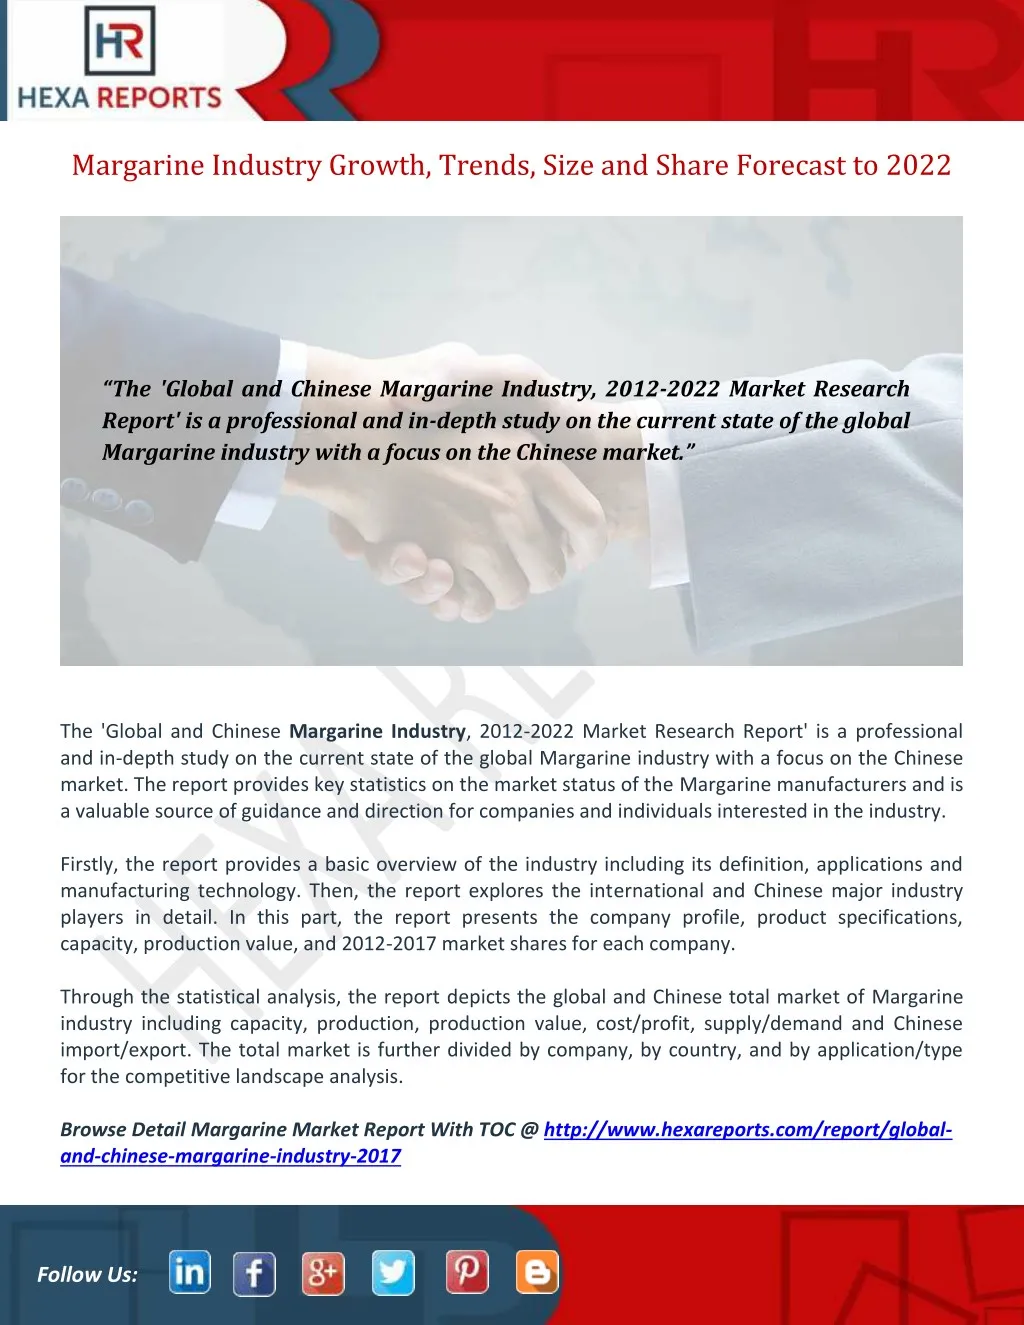 margarine industry growth trends size and share